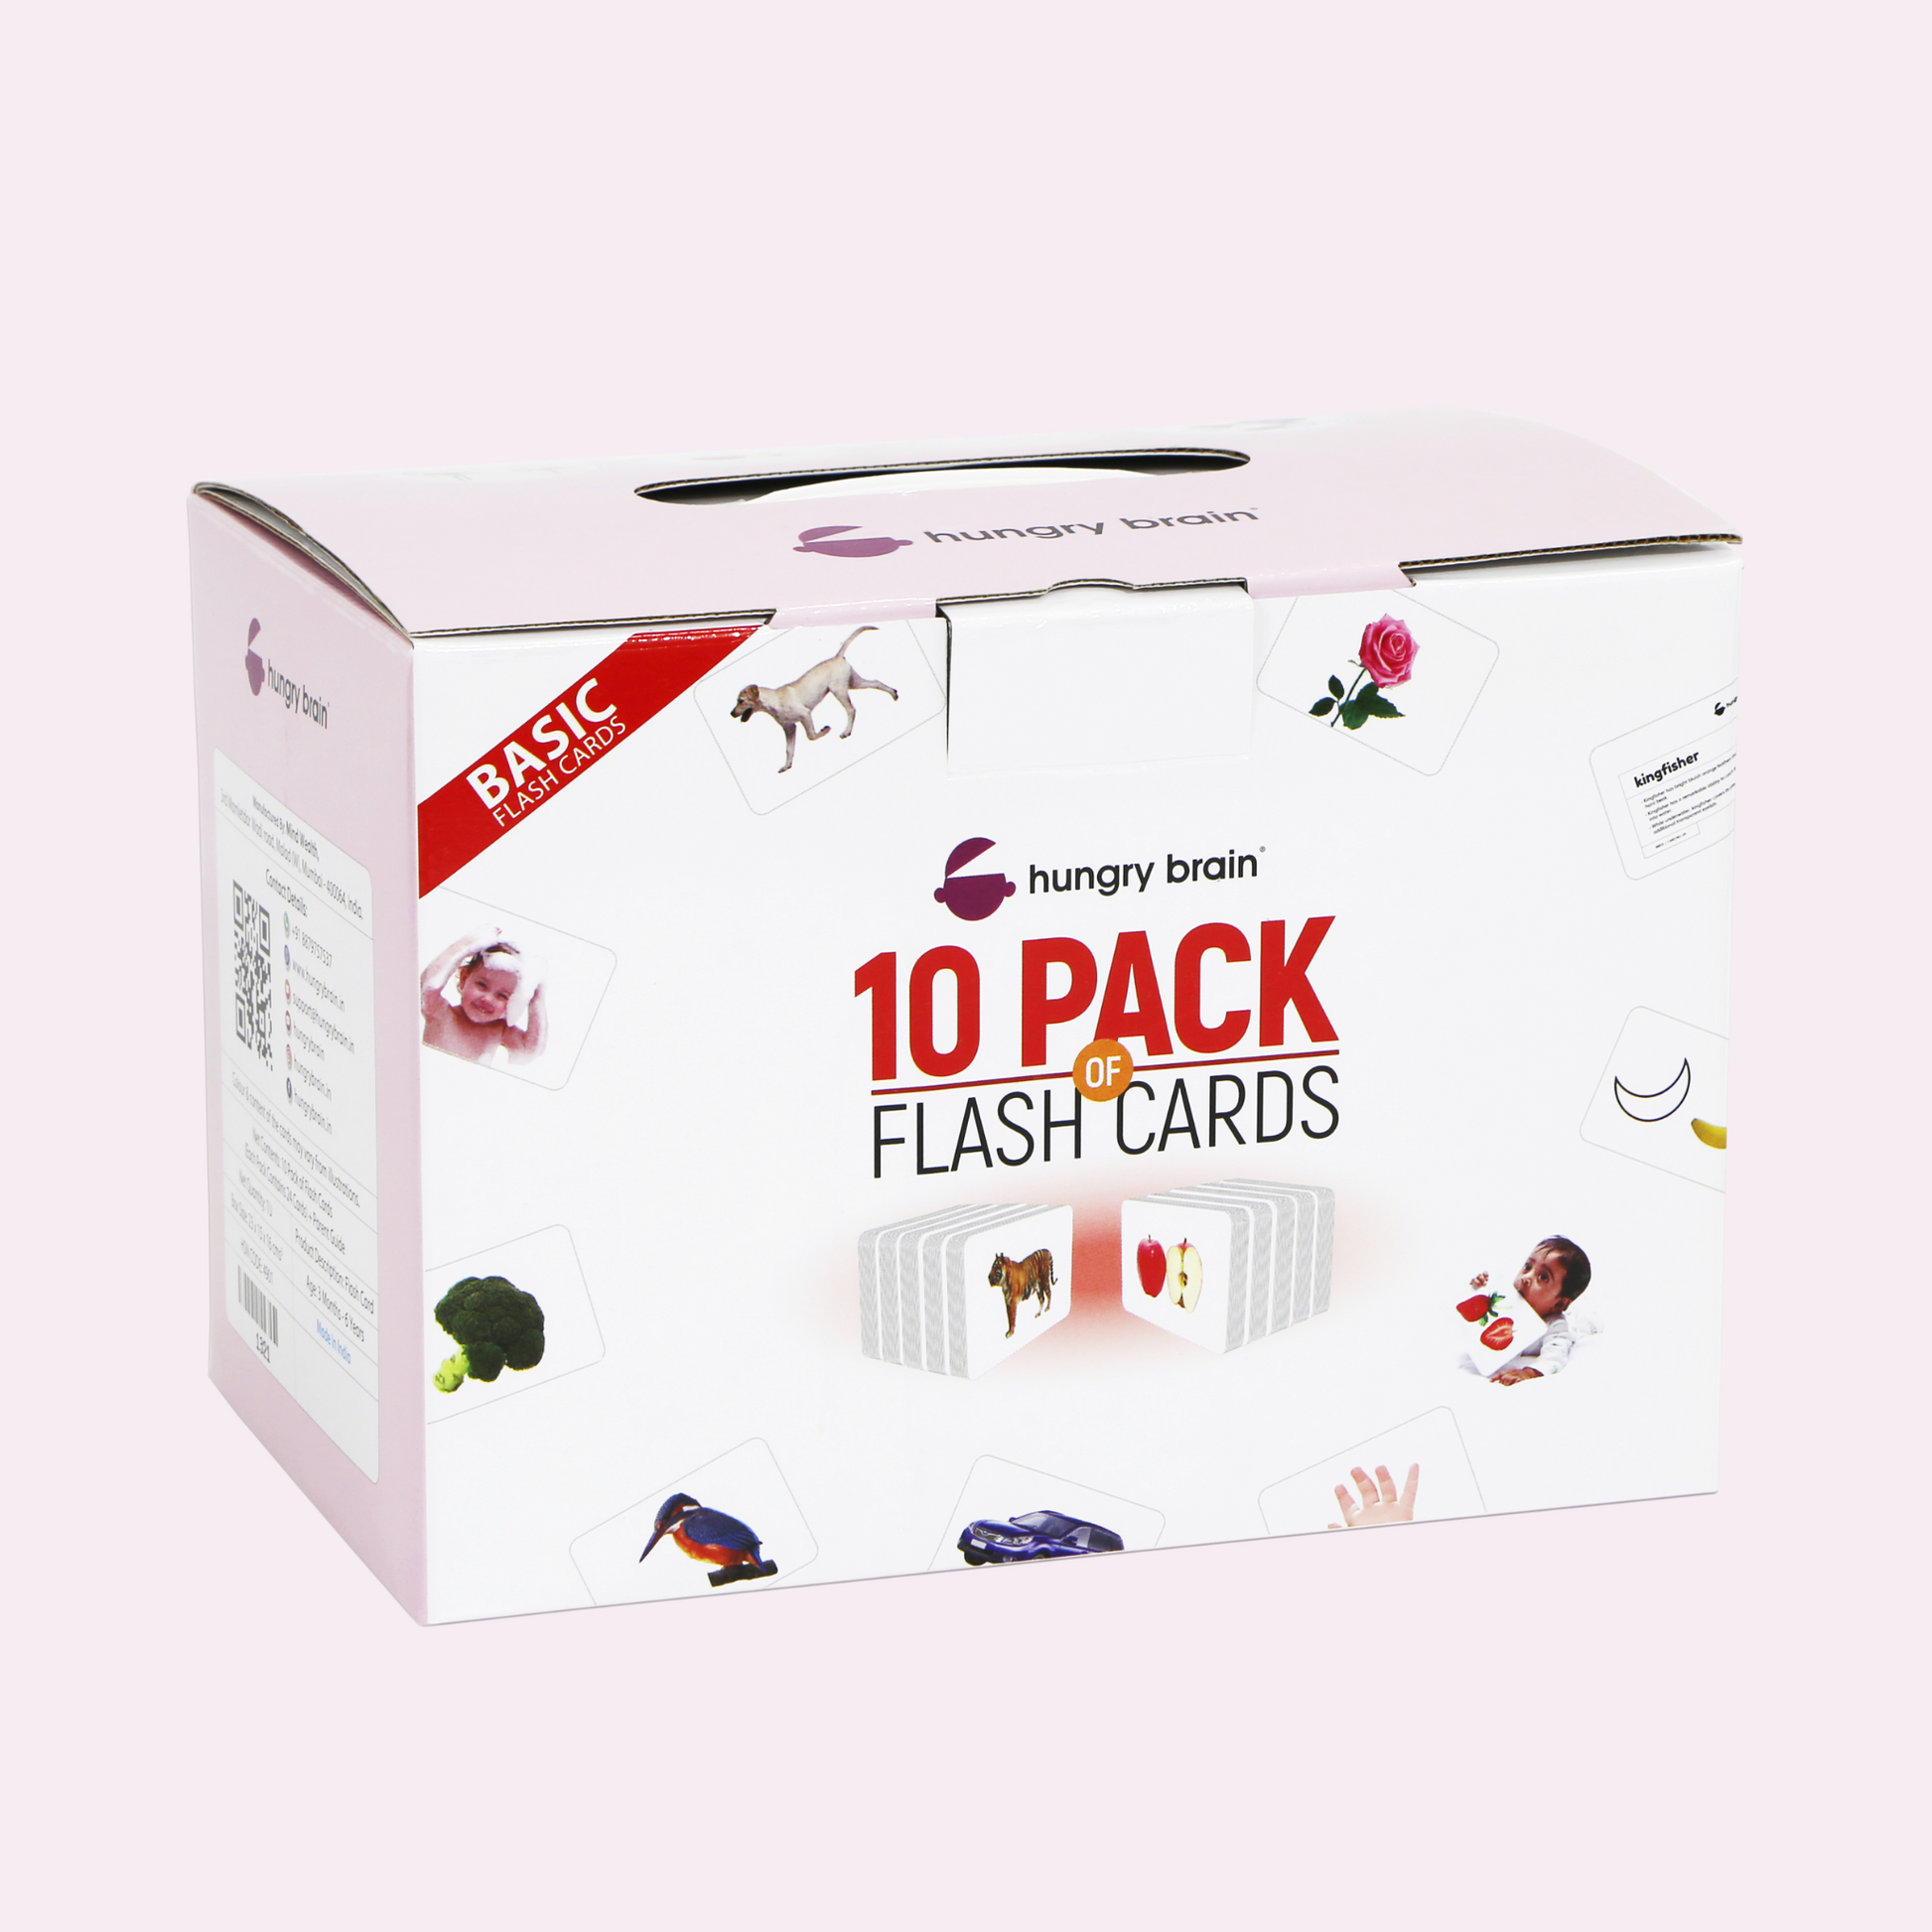 Our collection of 10 set of flashcards for kids is great for learning.